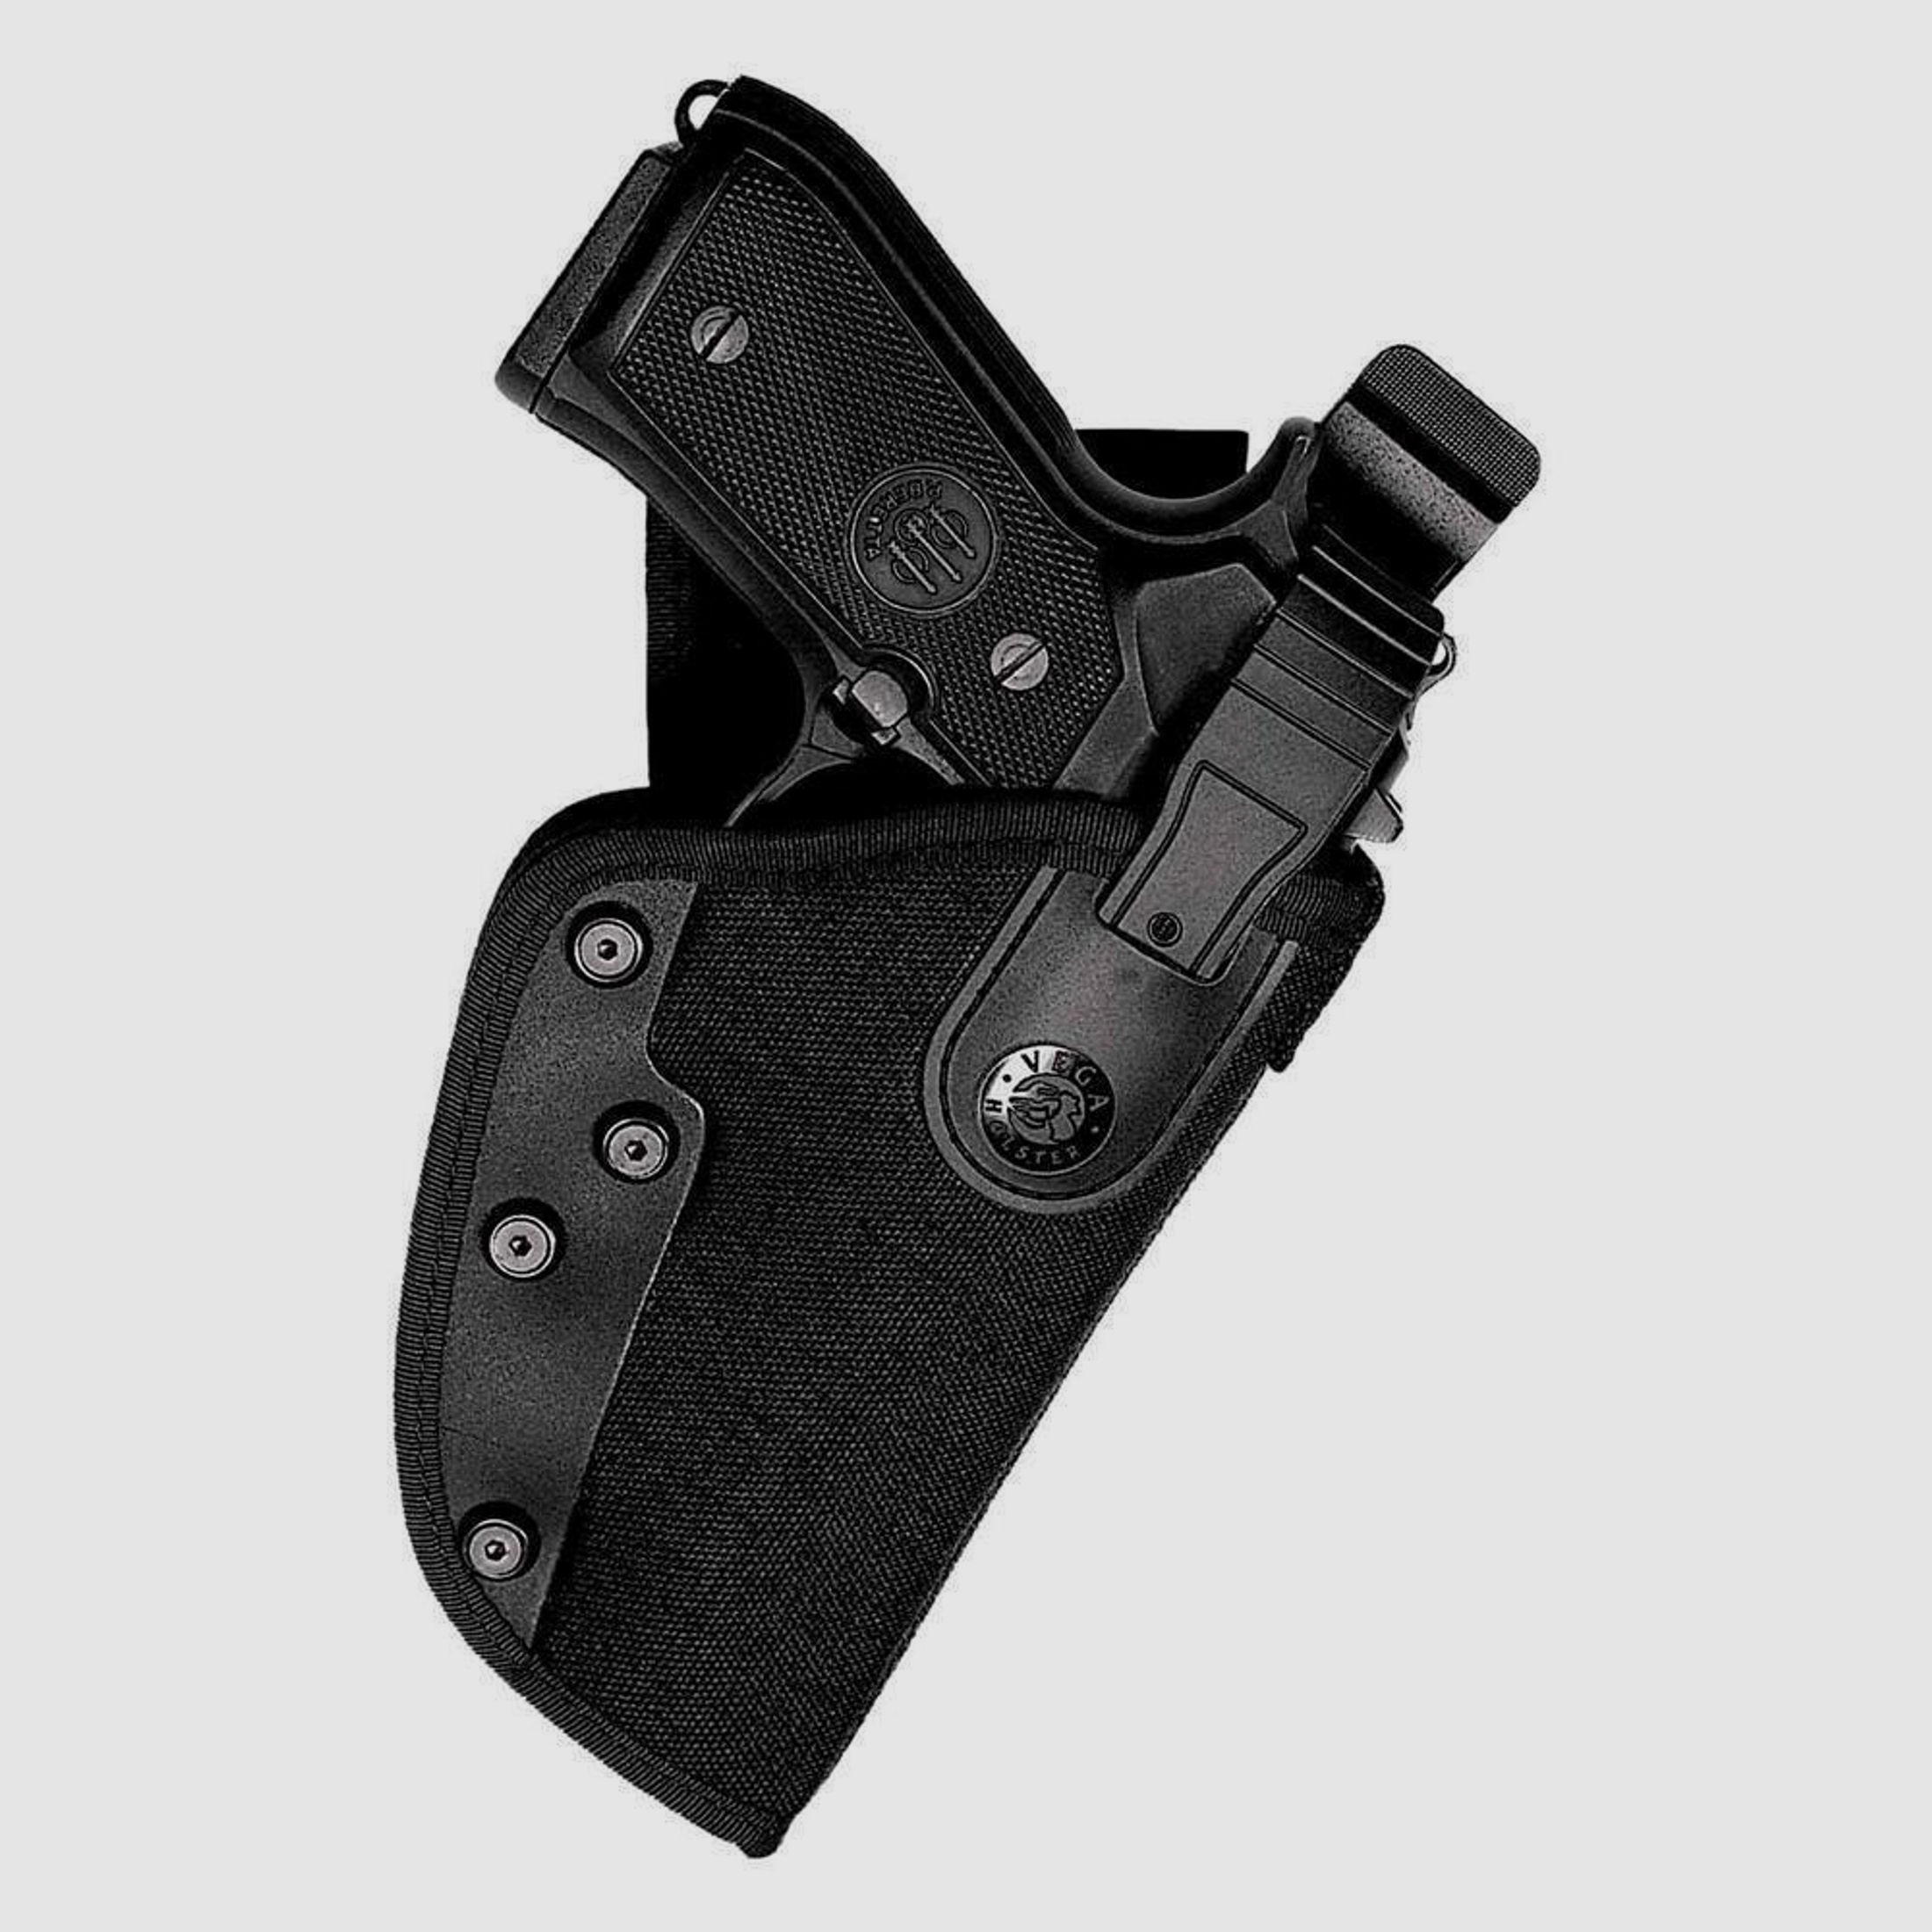 OWB-Holster mit Stop-Snap-Funktion Beretta 90 Two/92 A1/96 A1/98 A1 Taurus PT92/99/100/101 With Rail Linkshänder